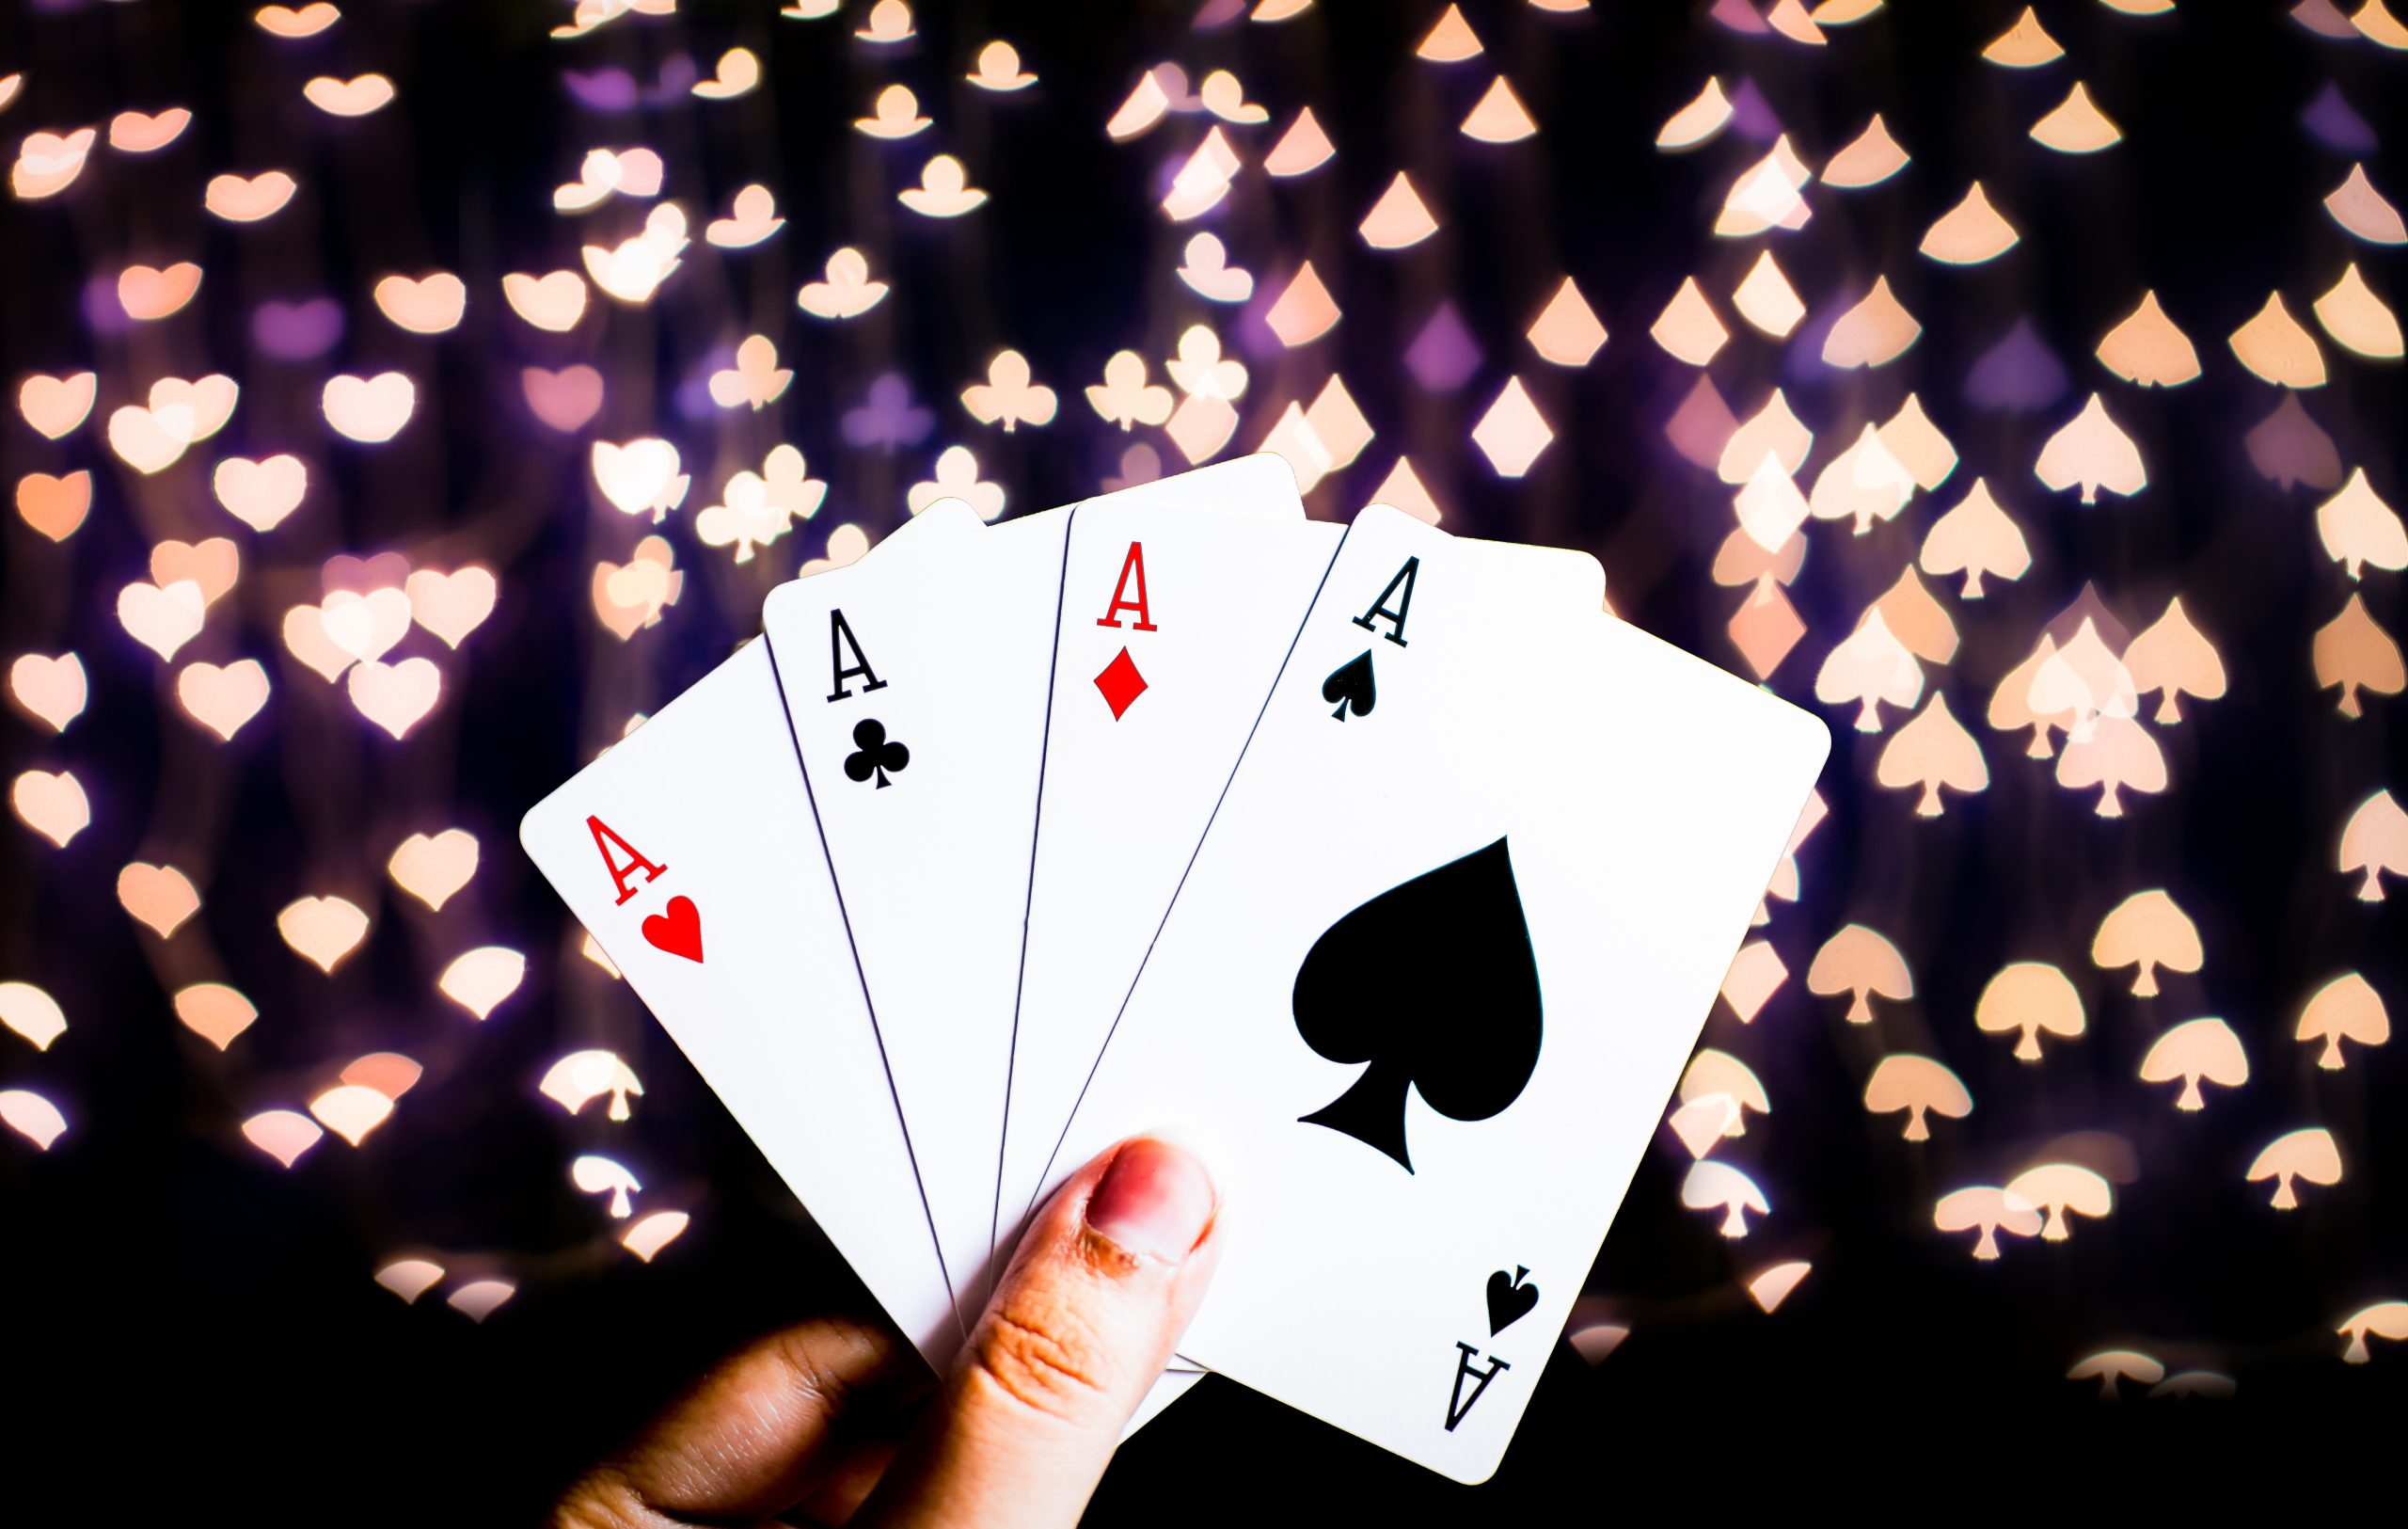 TIPS AND GUIDELINES TO PLAY RUMMY